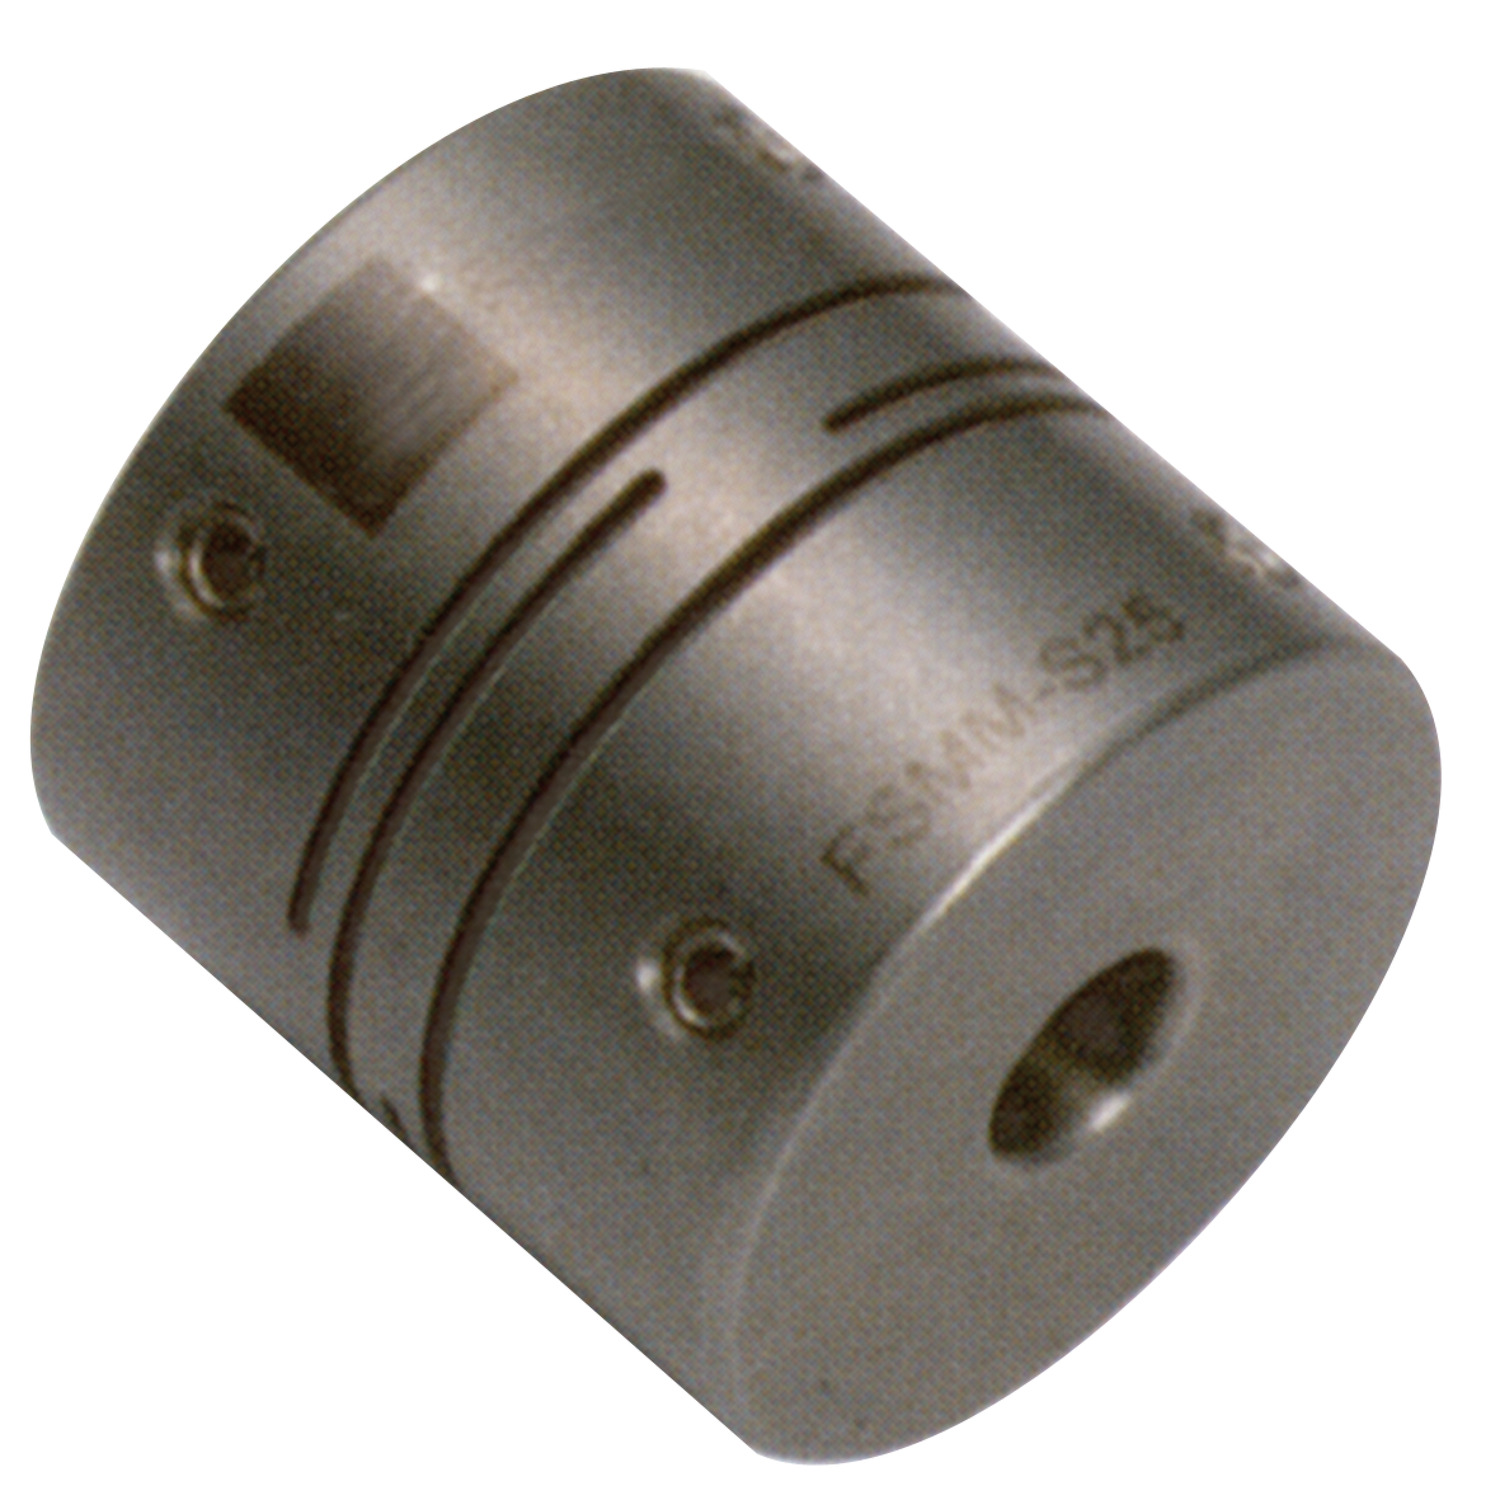 R3008 Spiral Beam Coupling - Stainless steel